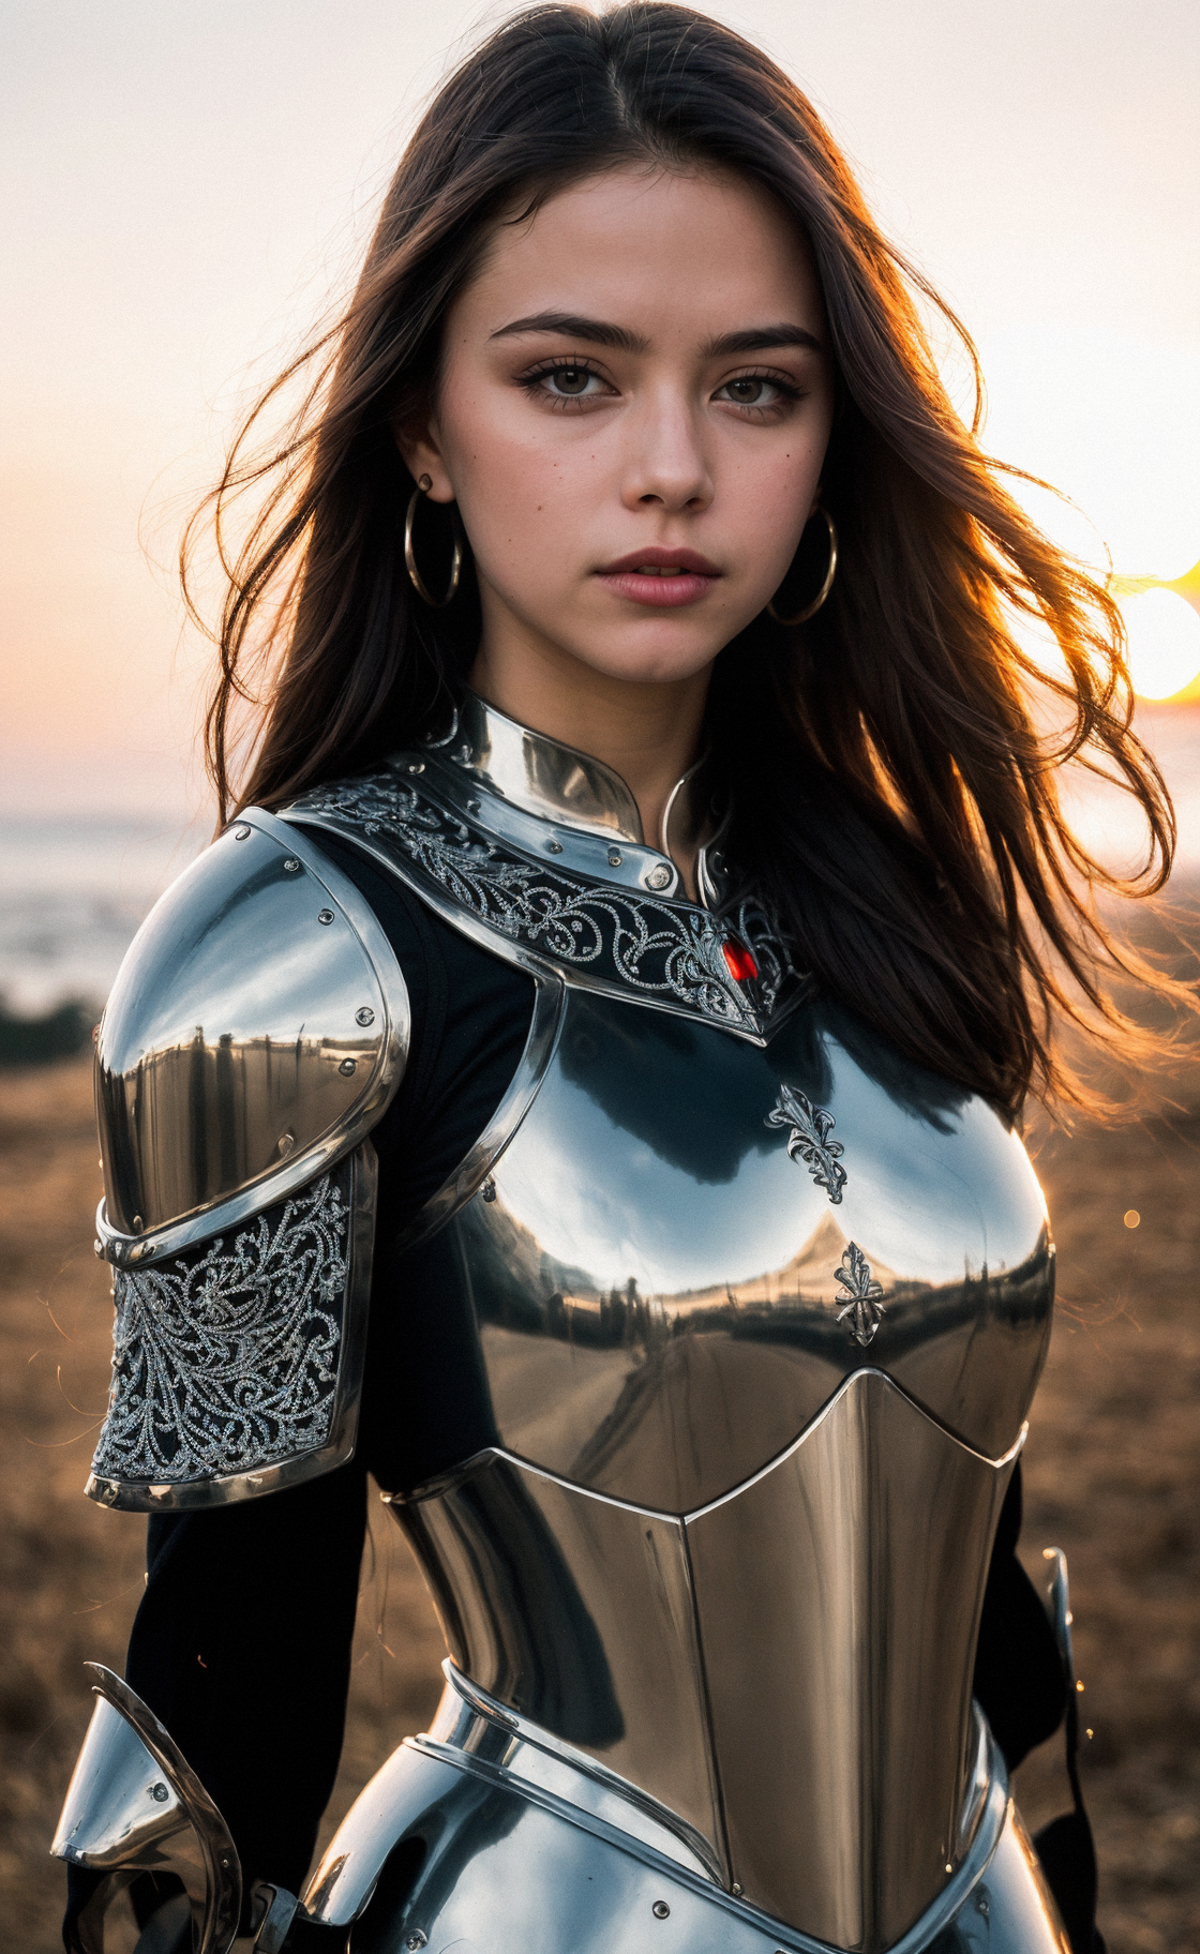 A woman wearing a shiny silver armor posing in front of the sun.